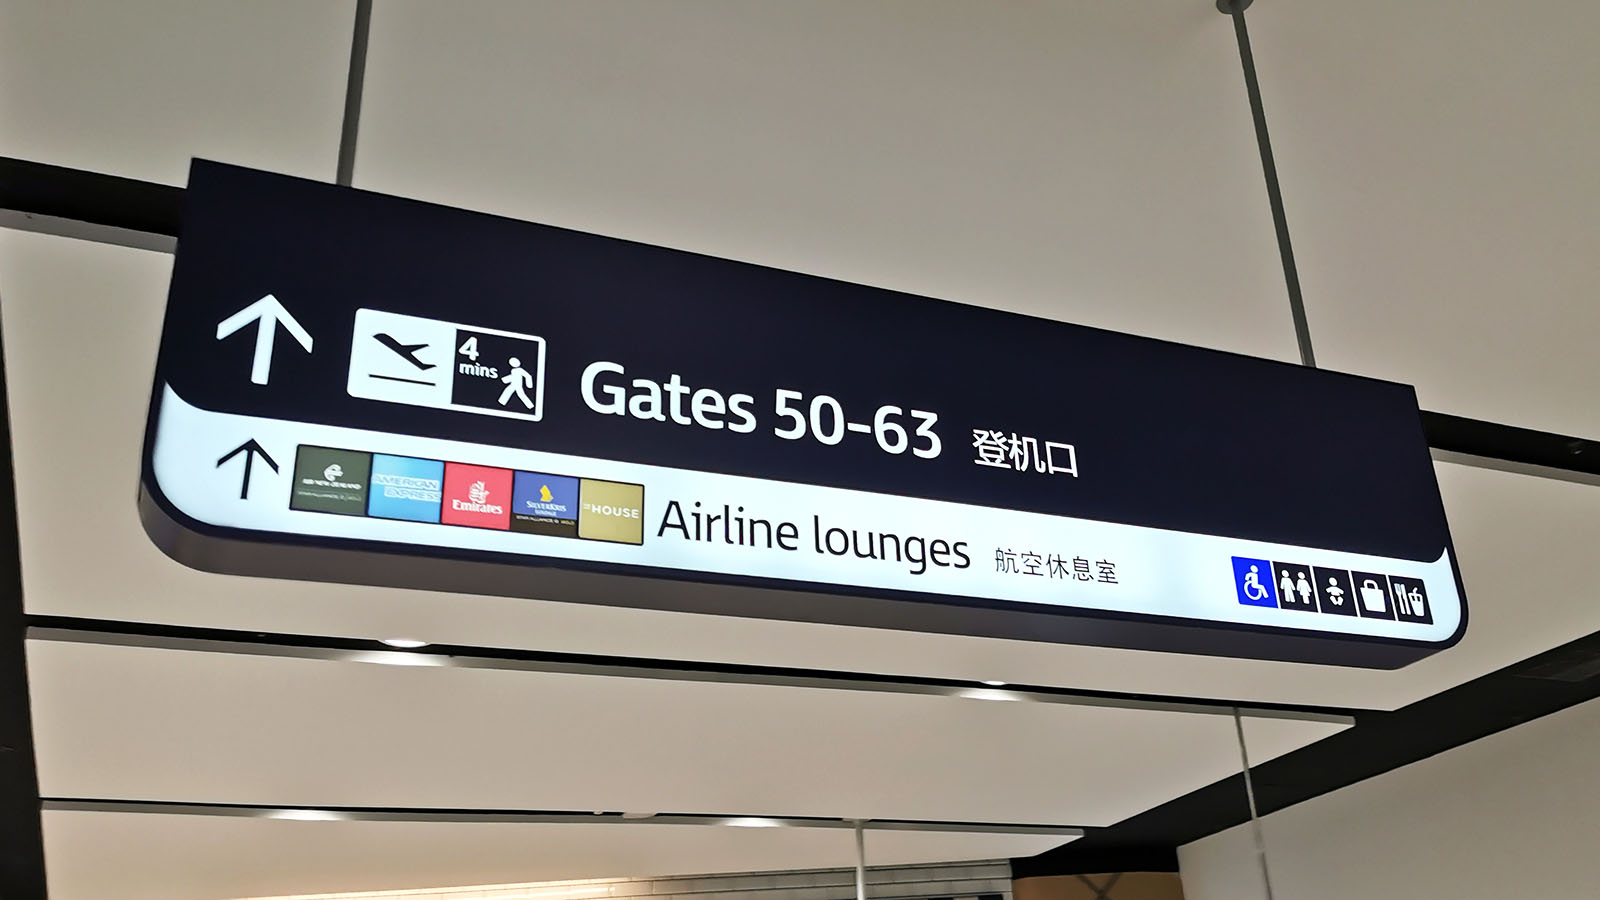 Sign at Sydney Airport pointing towards Air New Zealand International Lounge